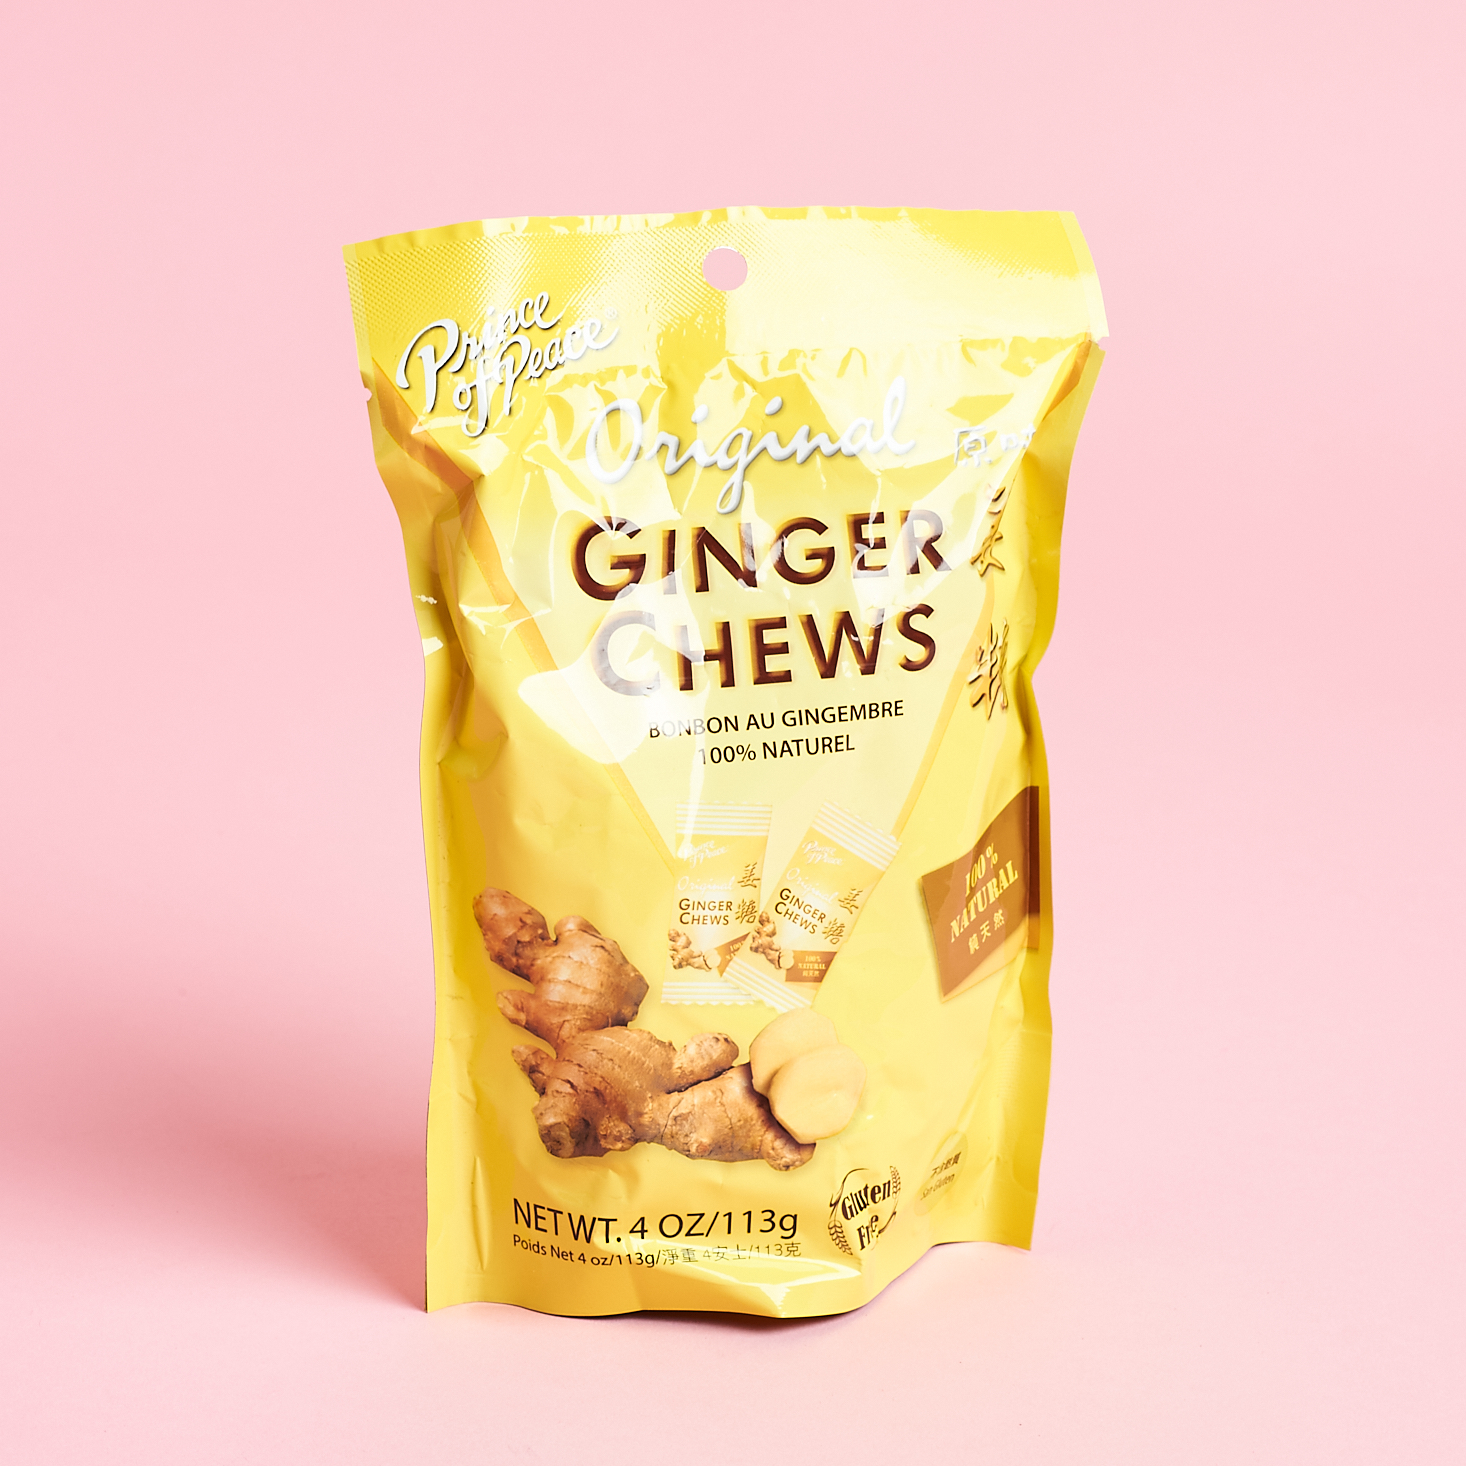 Prince of Peace Ginger Chews Bag